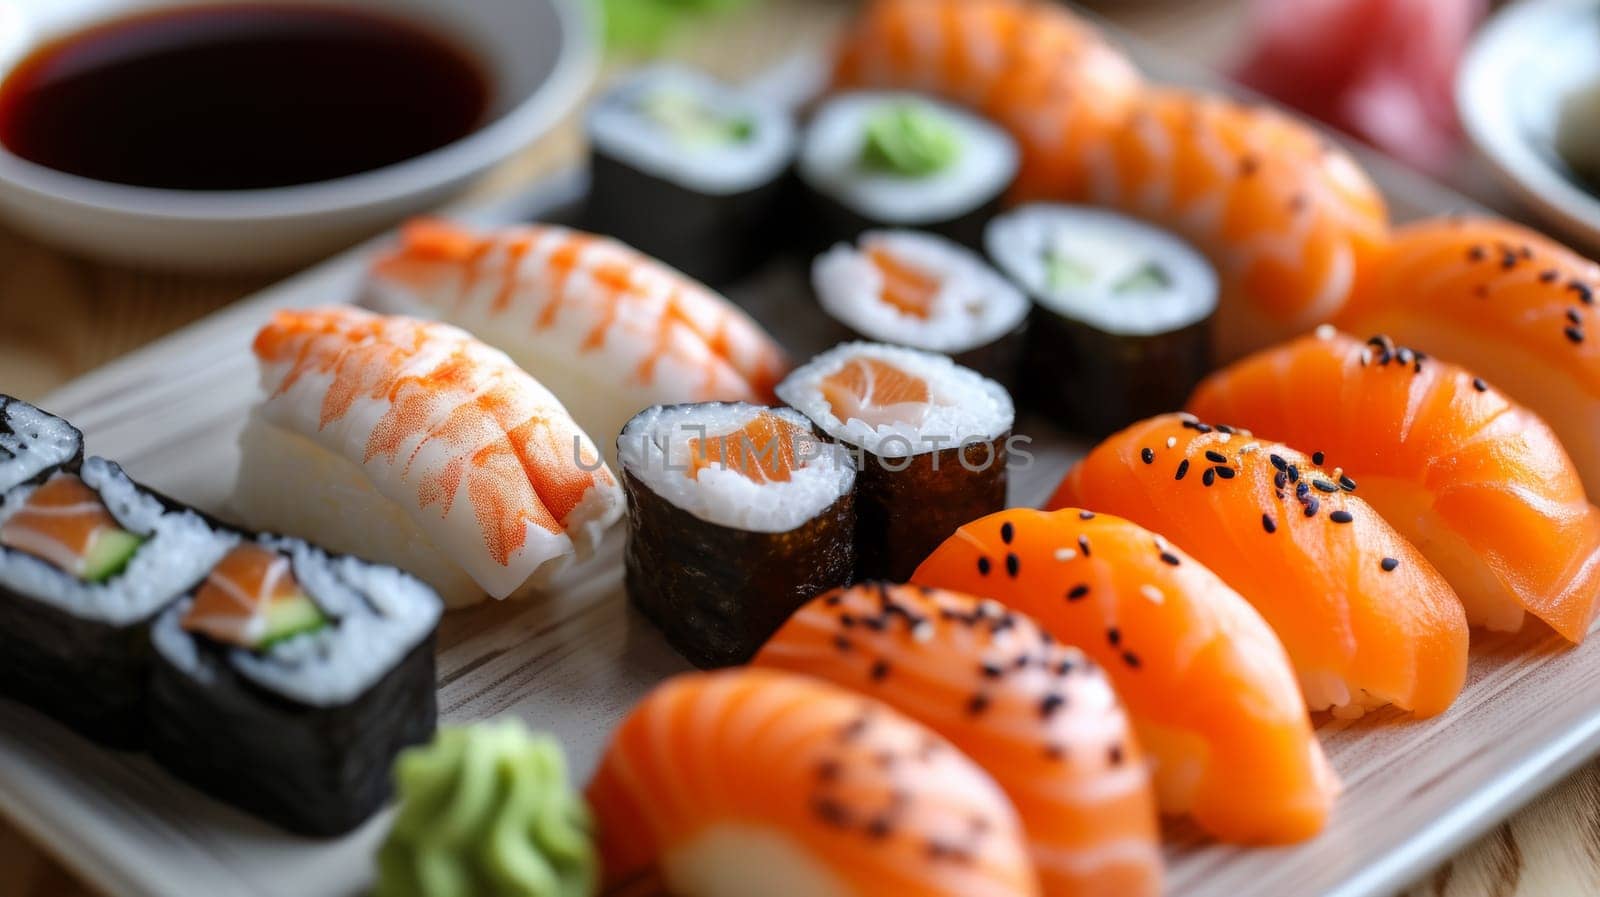 A plate of sushi with different types and colors on it